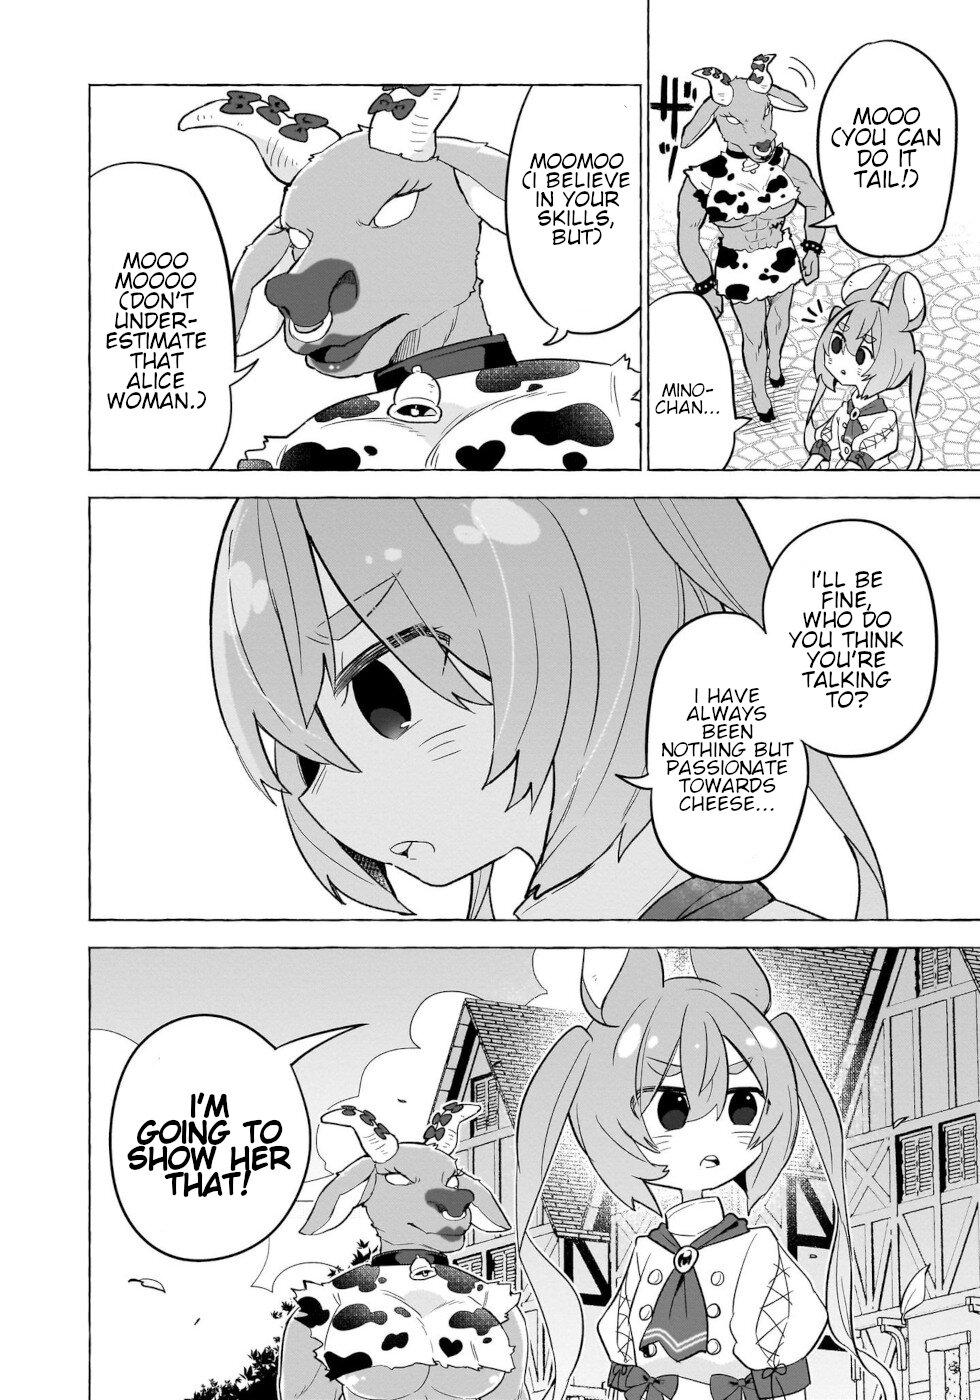 Sweets, Elf, And A High School Girl Vol.2 Chapter 9